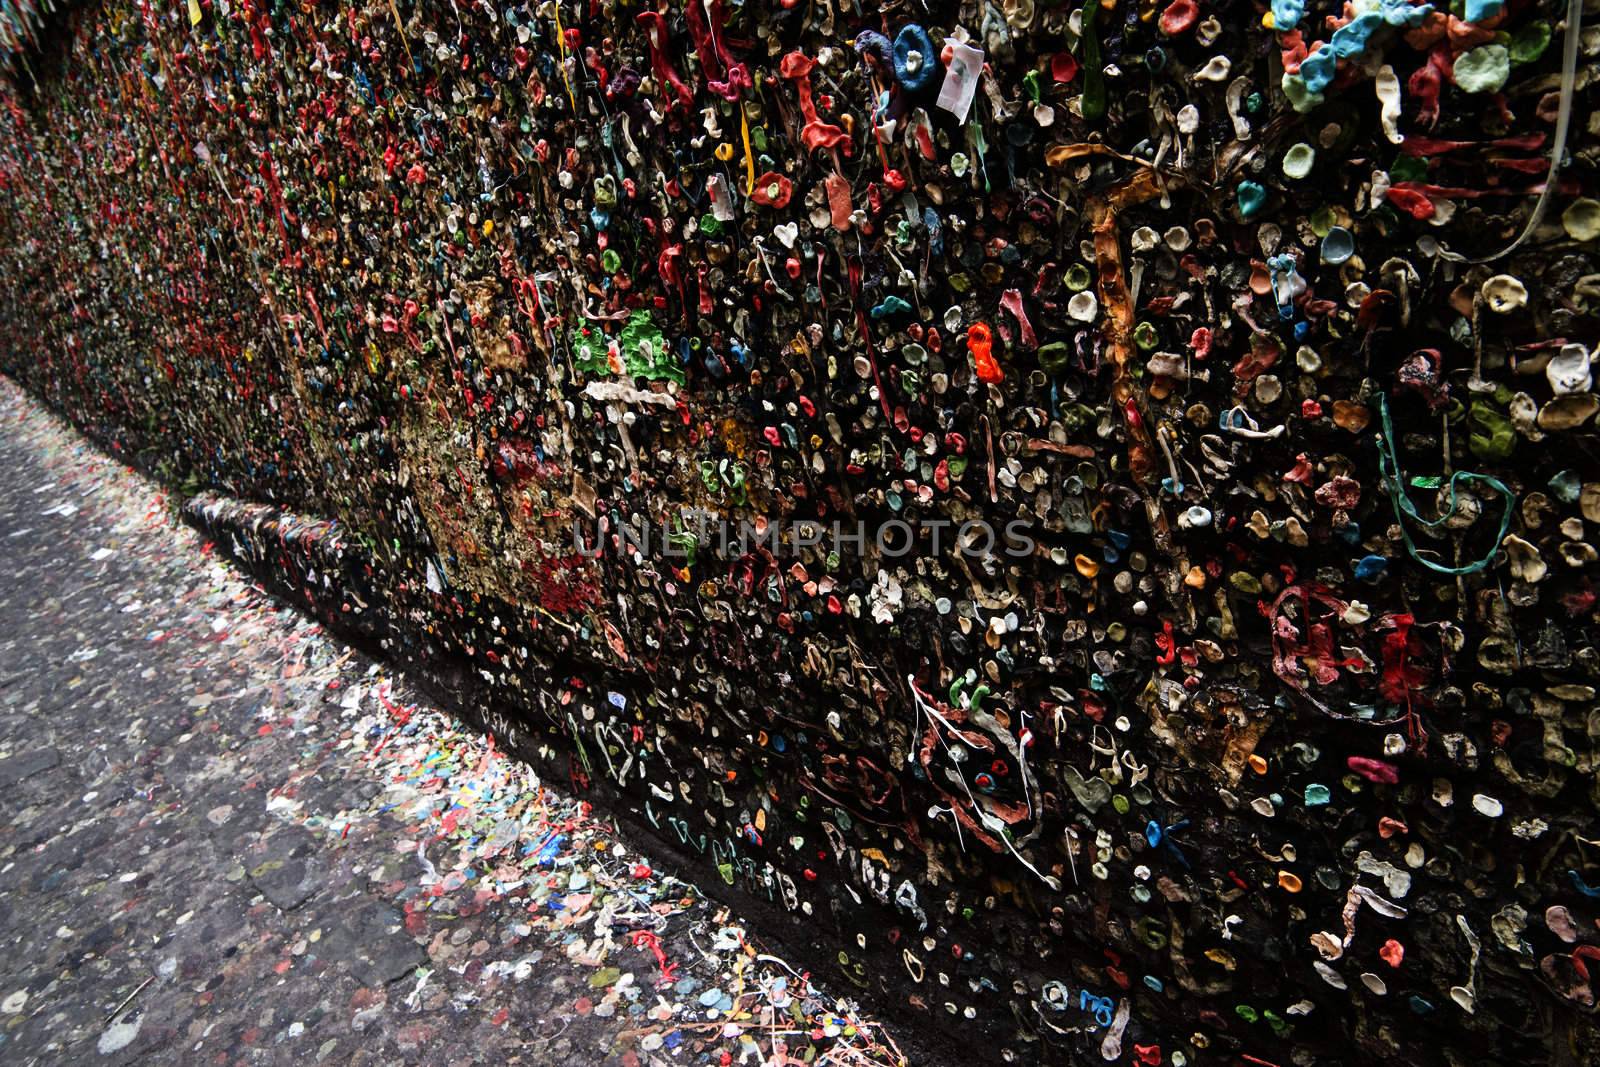 Post Alley Chewing Gum Wall Seattle Washington USA by ChrisBoswell